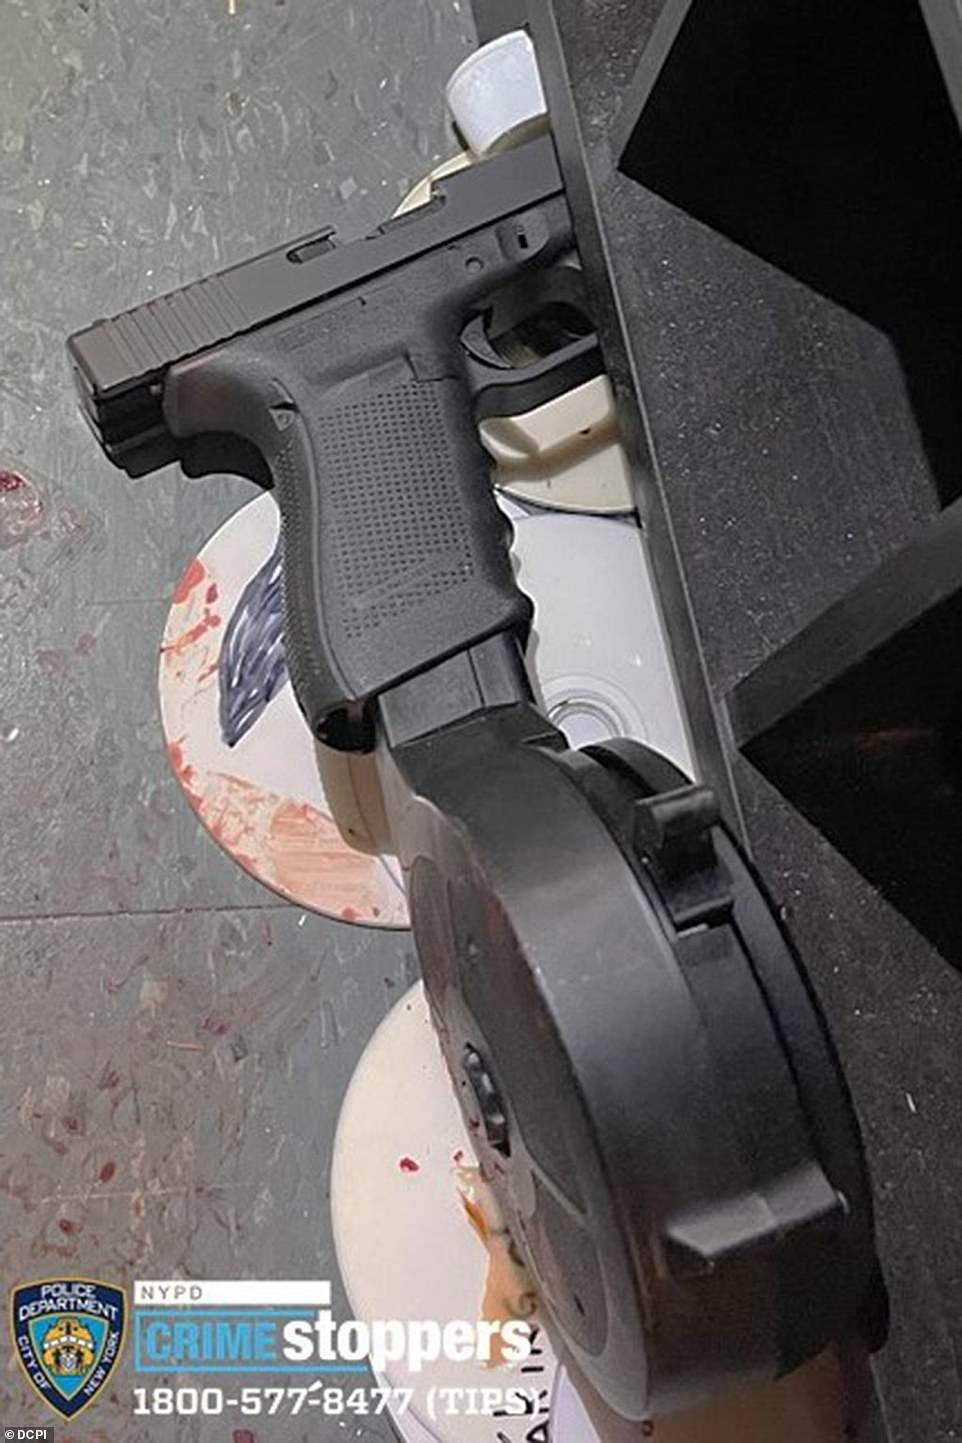 The illegal Glock with a 45 round magazine that was used to kill NYPD officer 1